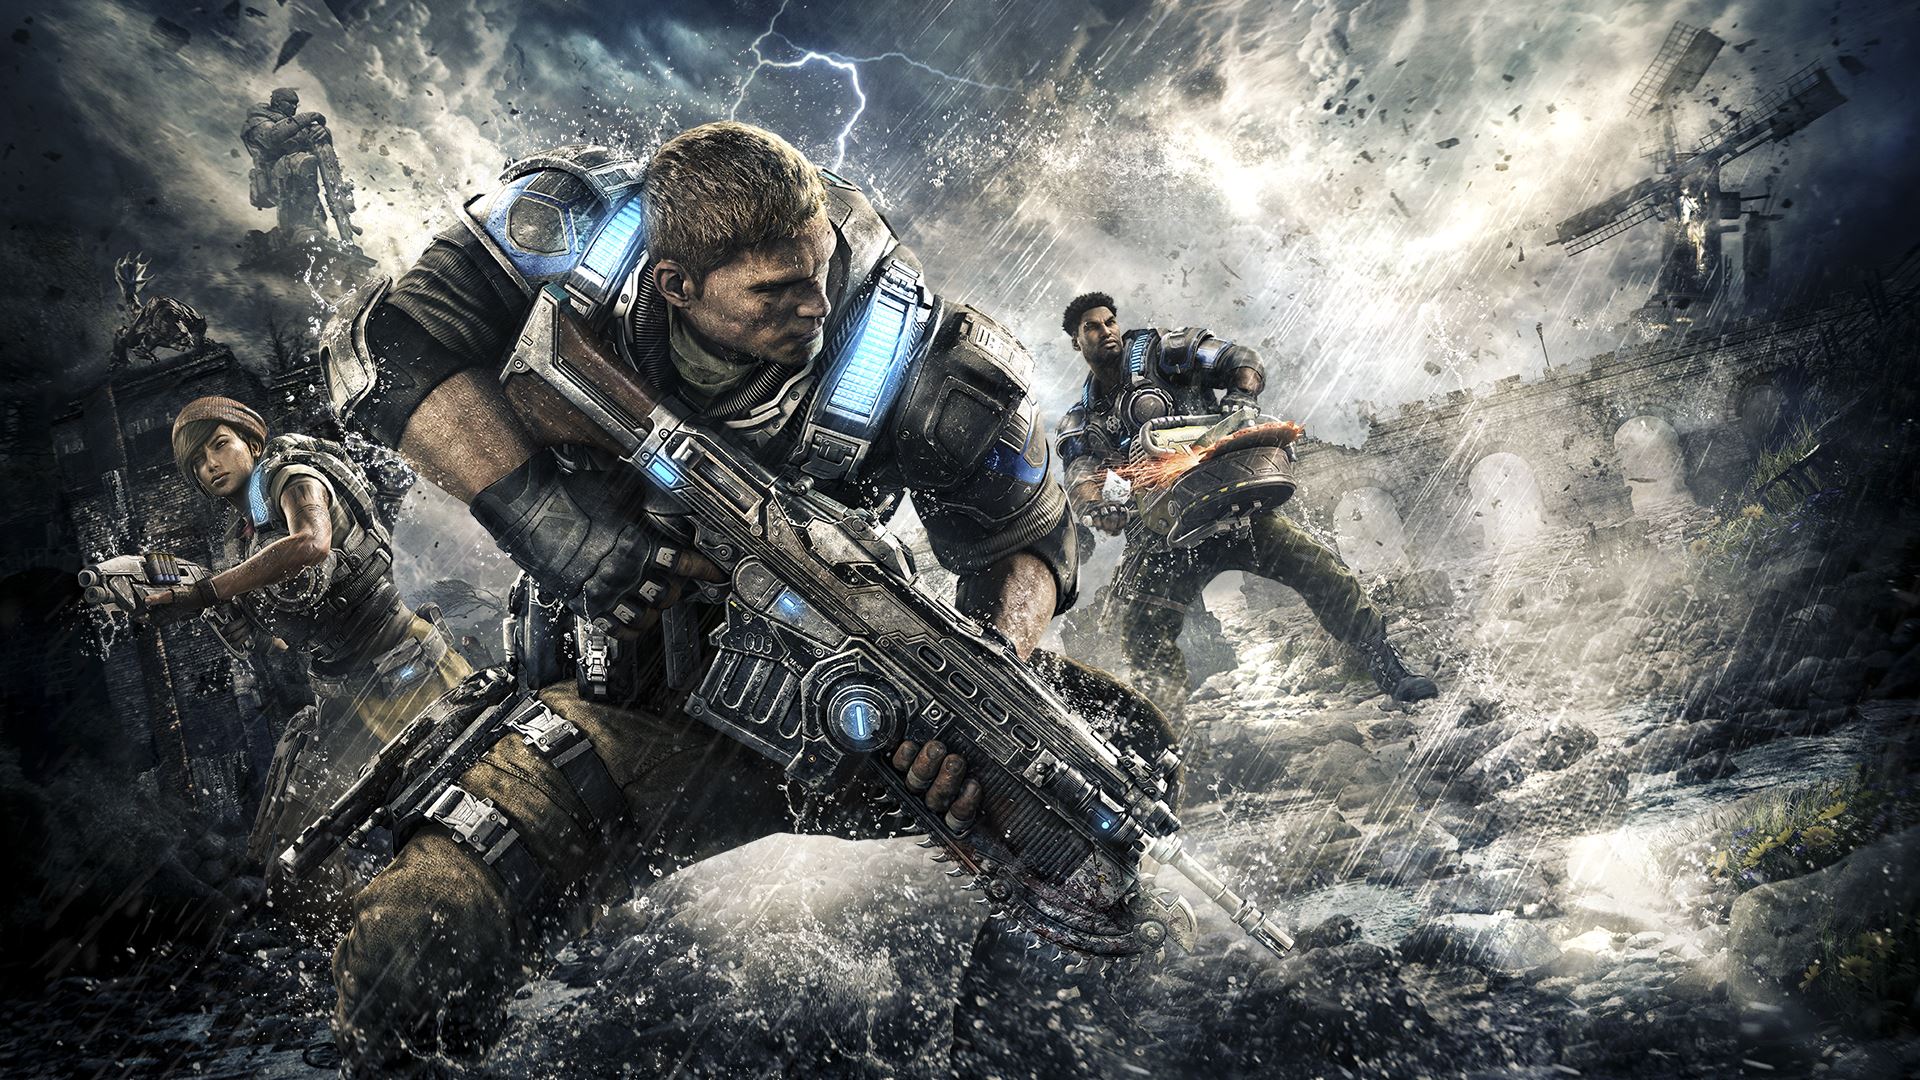 Image for Let's Play Gears of War 4 PC at 4K 60fps